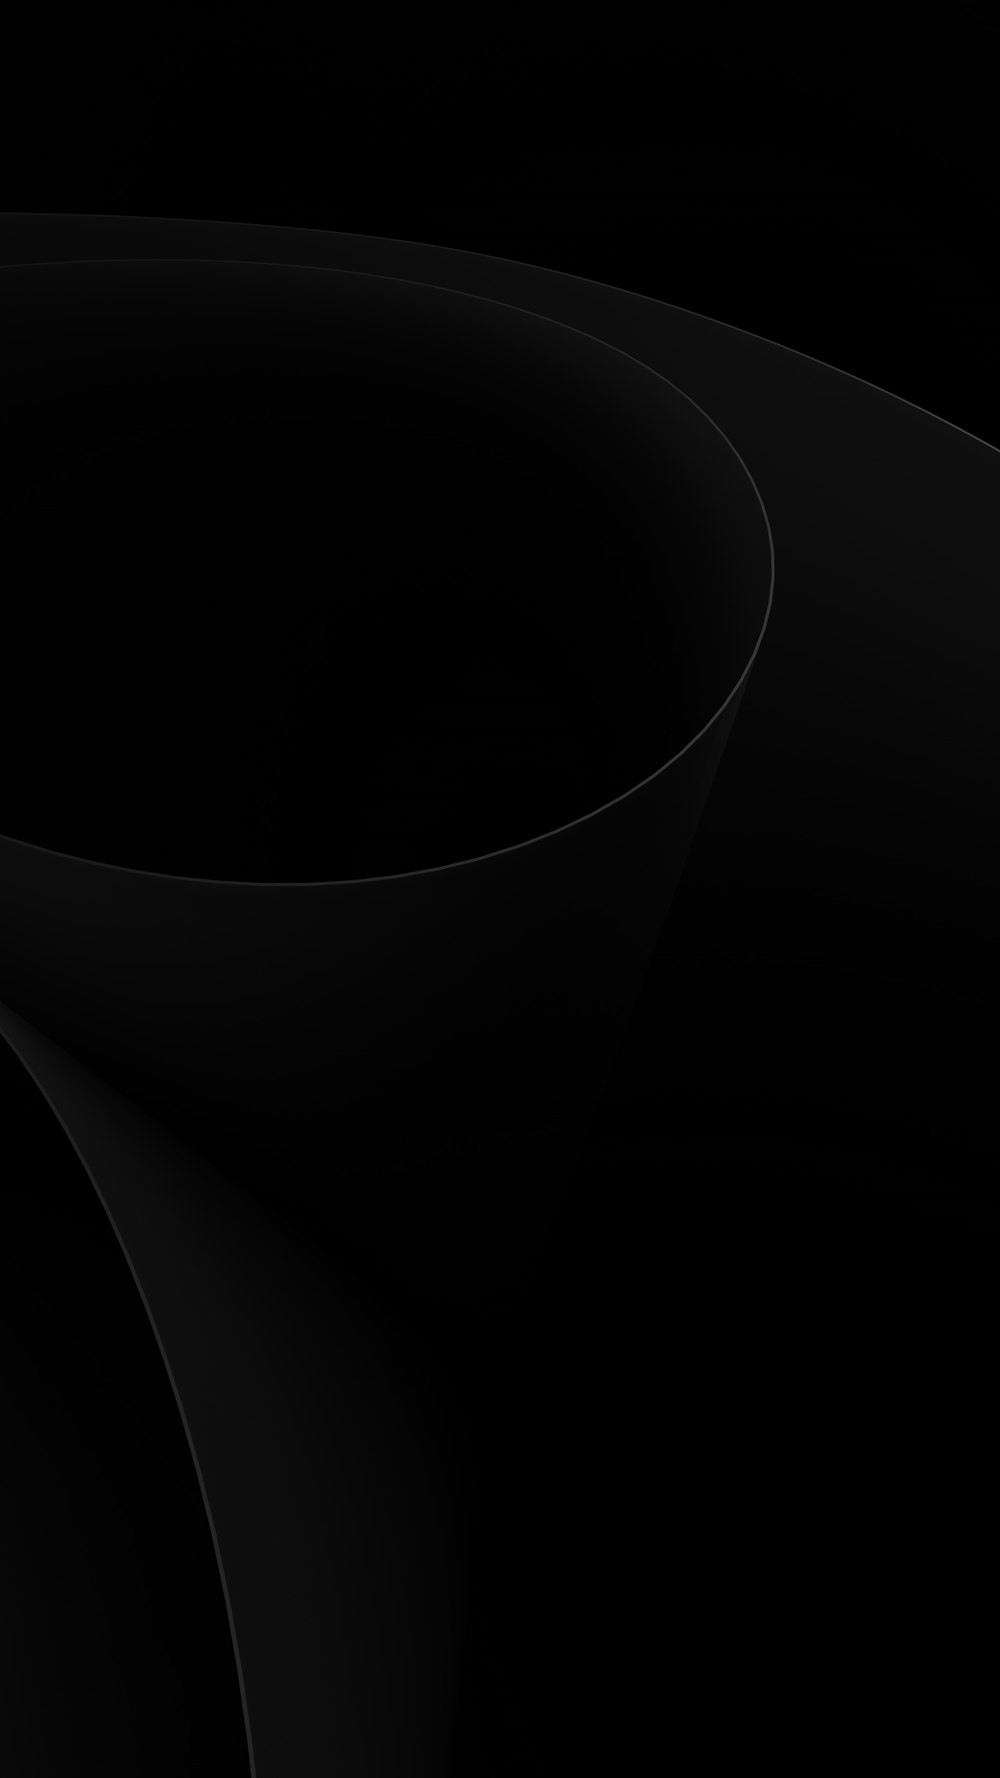 an abstract black background with a curved curve